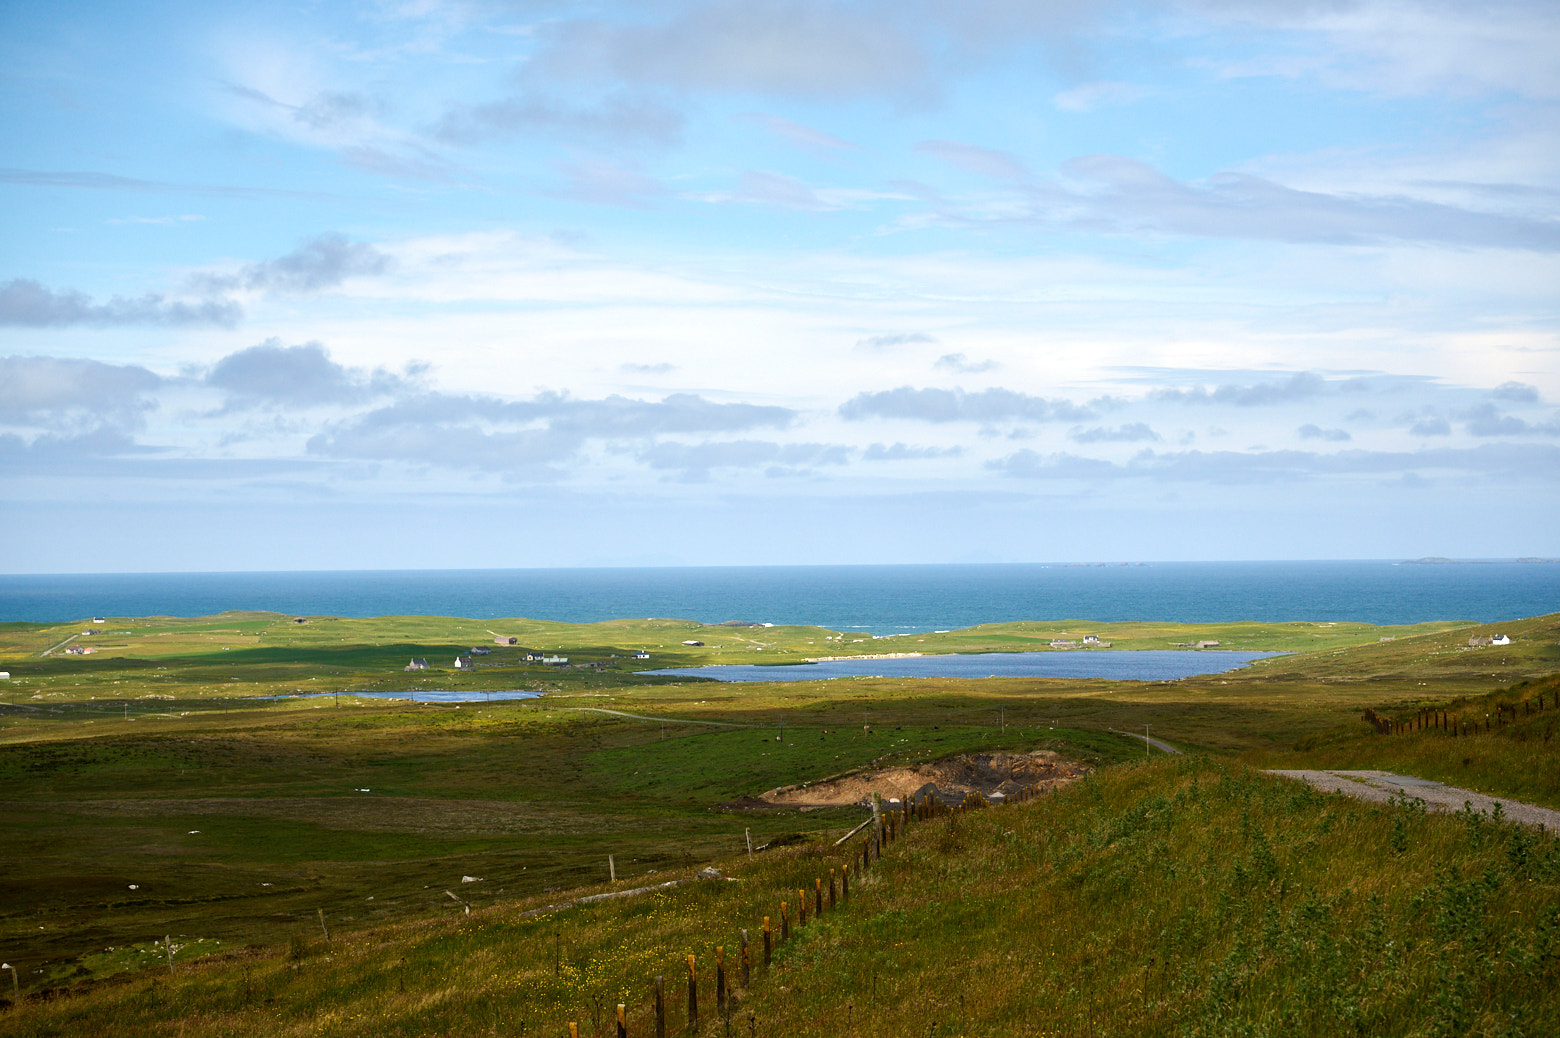 Looking out from North Uist towards St Kilda, Outer Hebrides